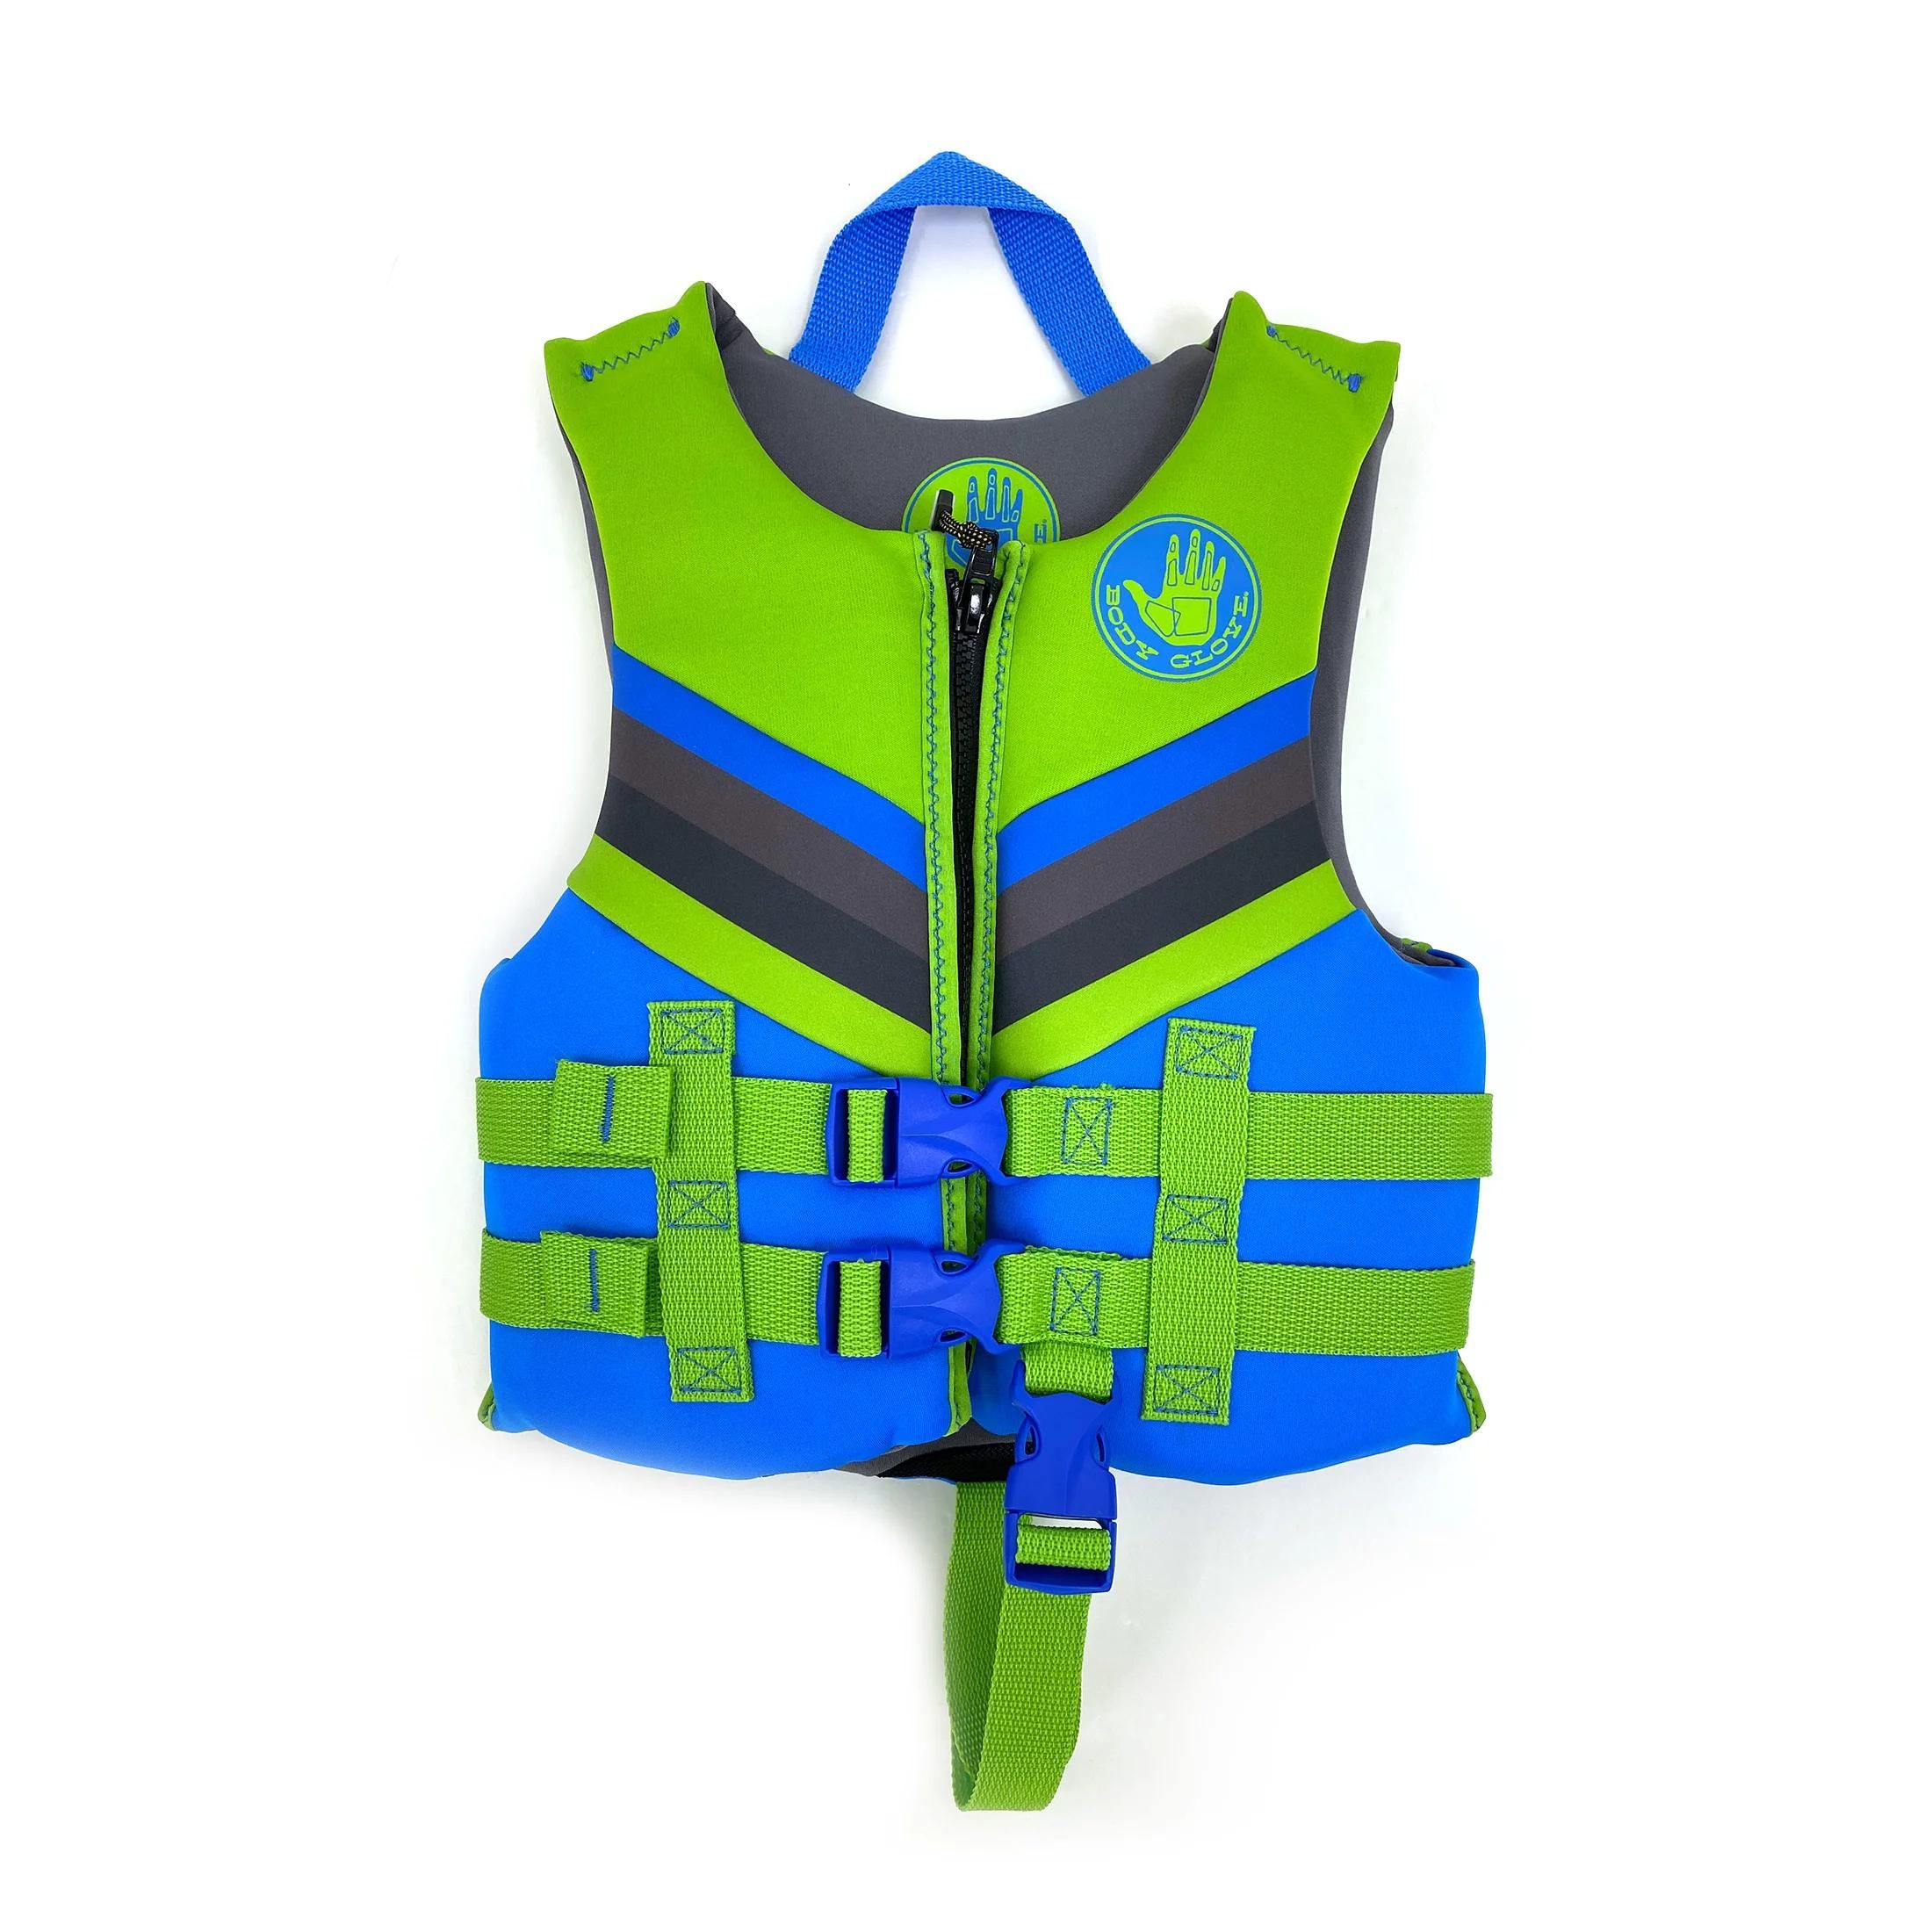 The 11 Best Kids' Life Jackets 2022 - Kids' Life Jacket Review